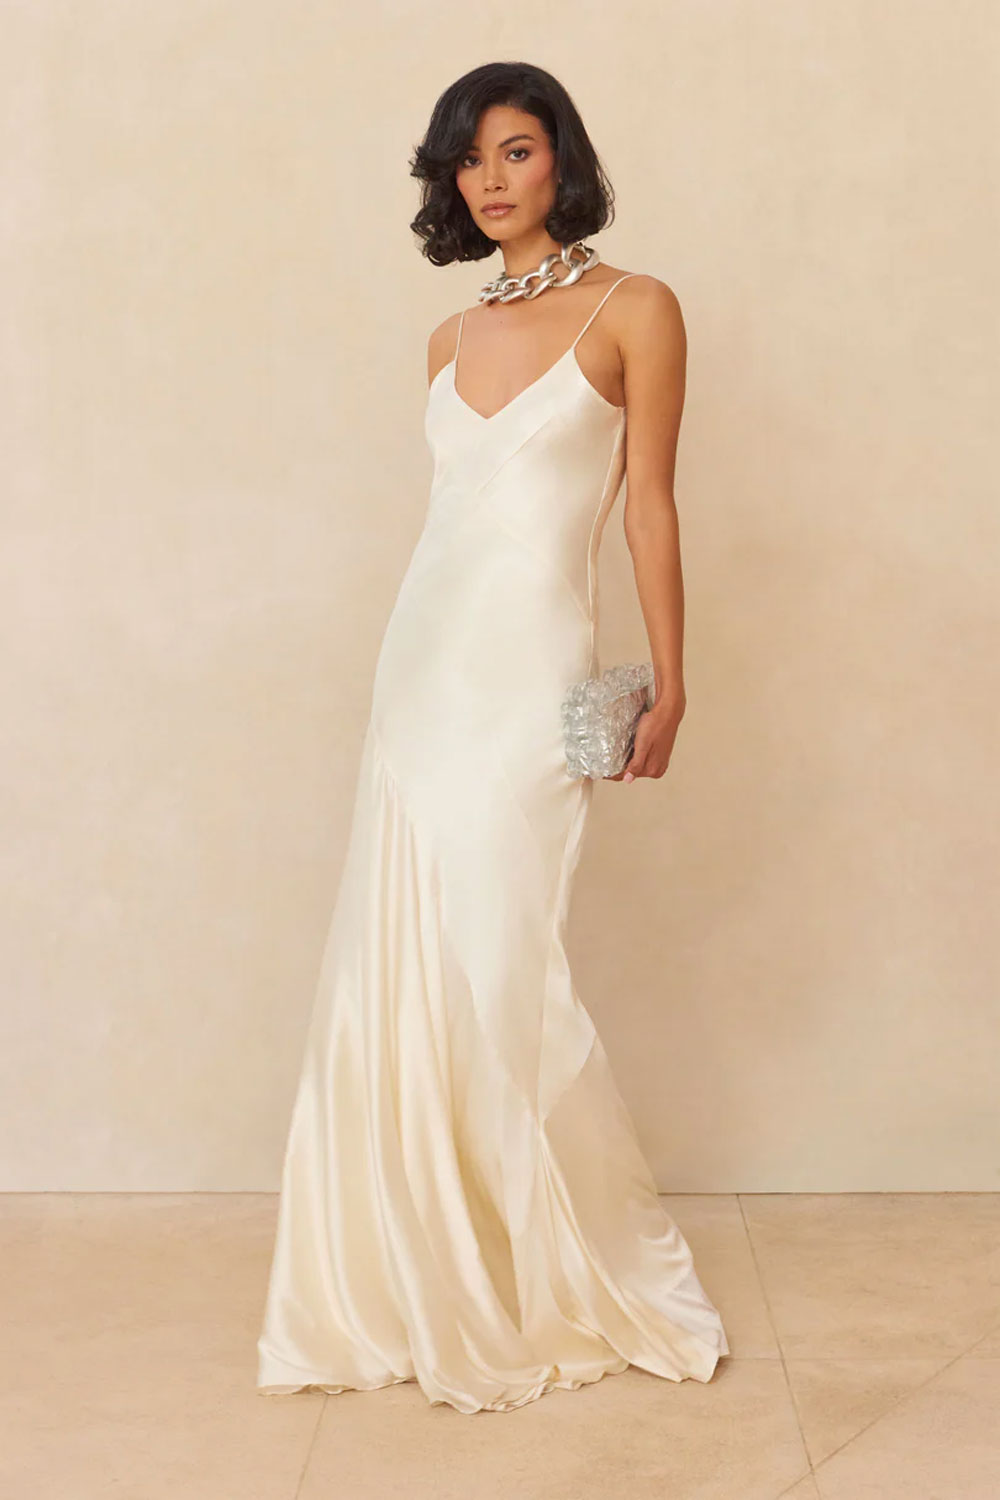 Crissy silk slip bridal gown from Cult Gaia - where to buy wedding dresses online